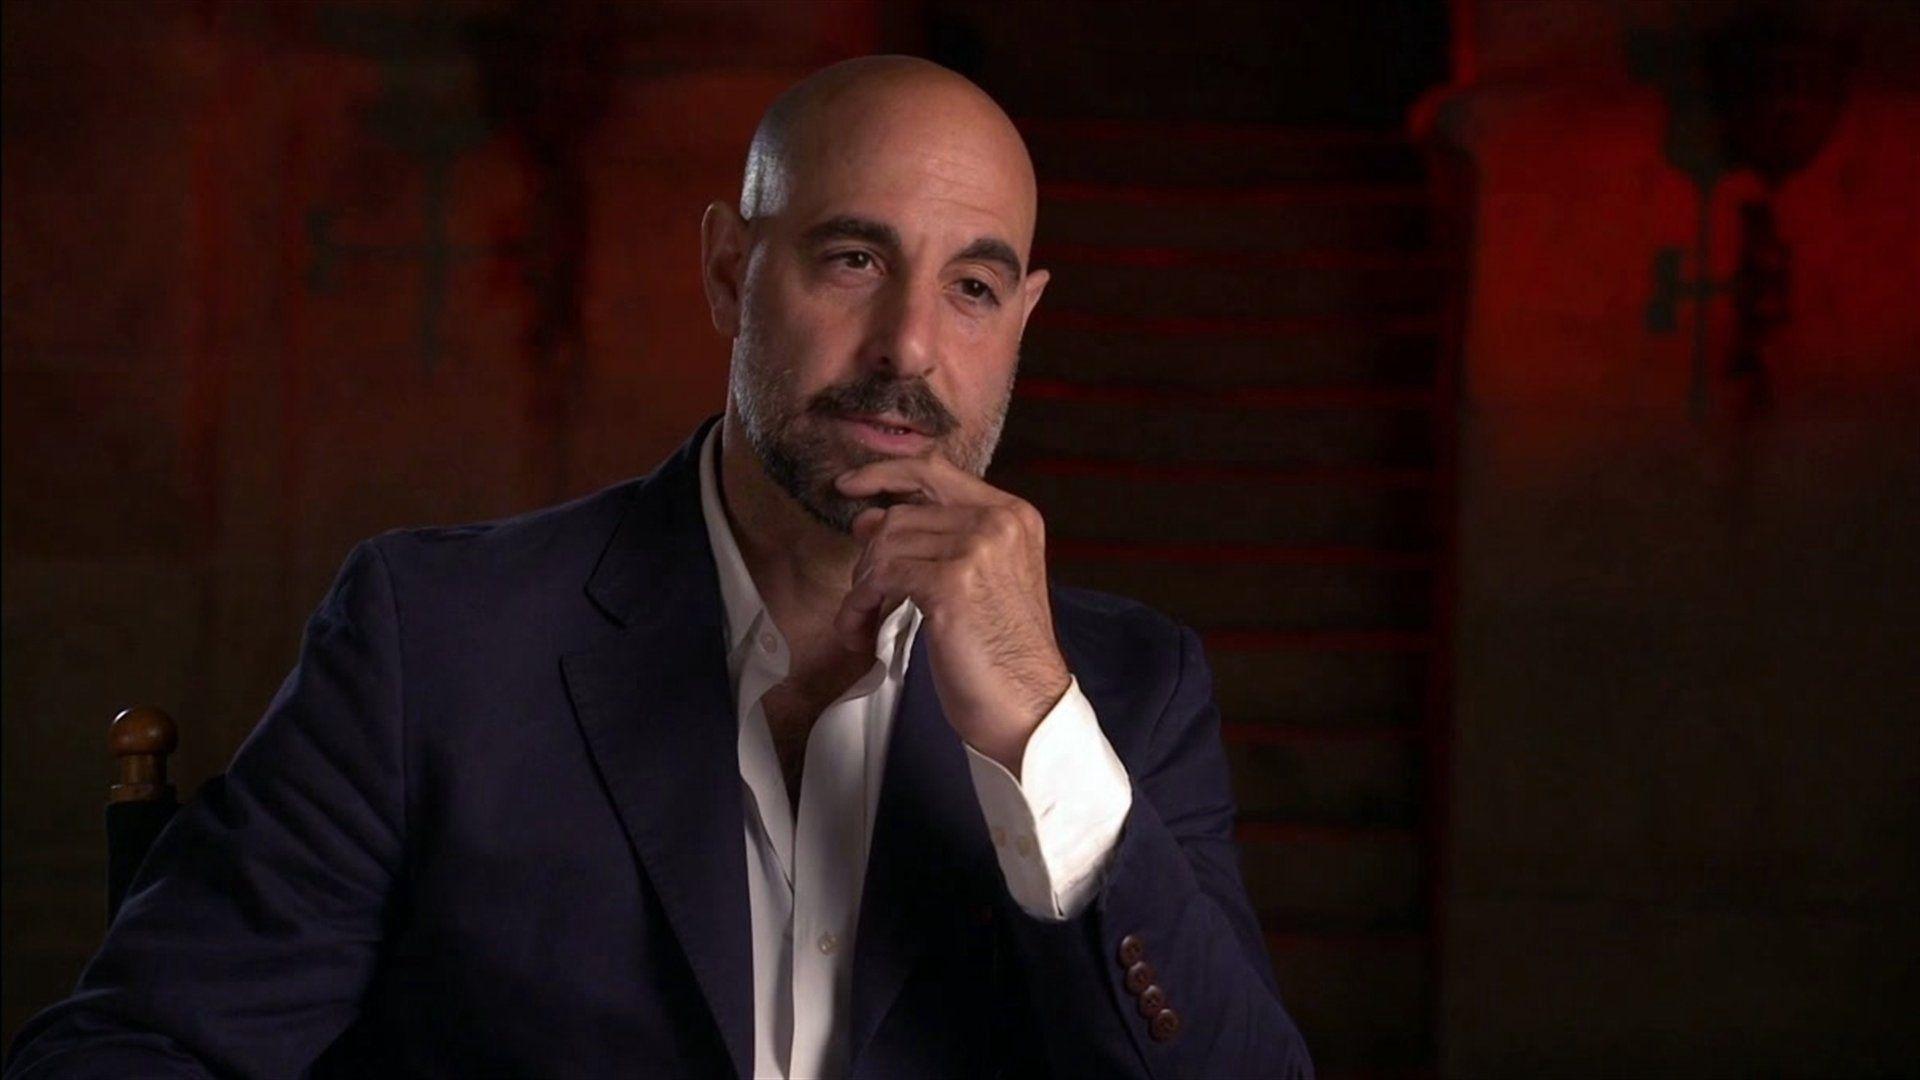 Jack The Giant Slayer: Stanley Tucci On His Character